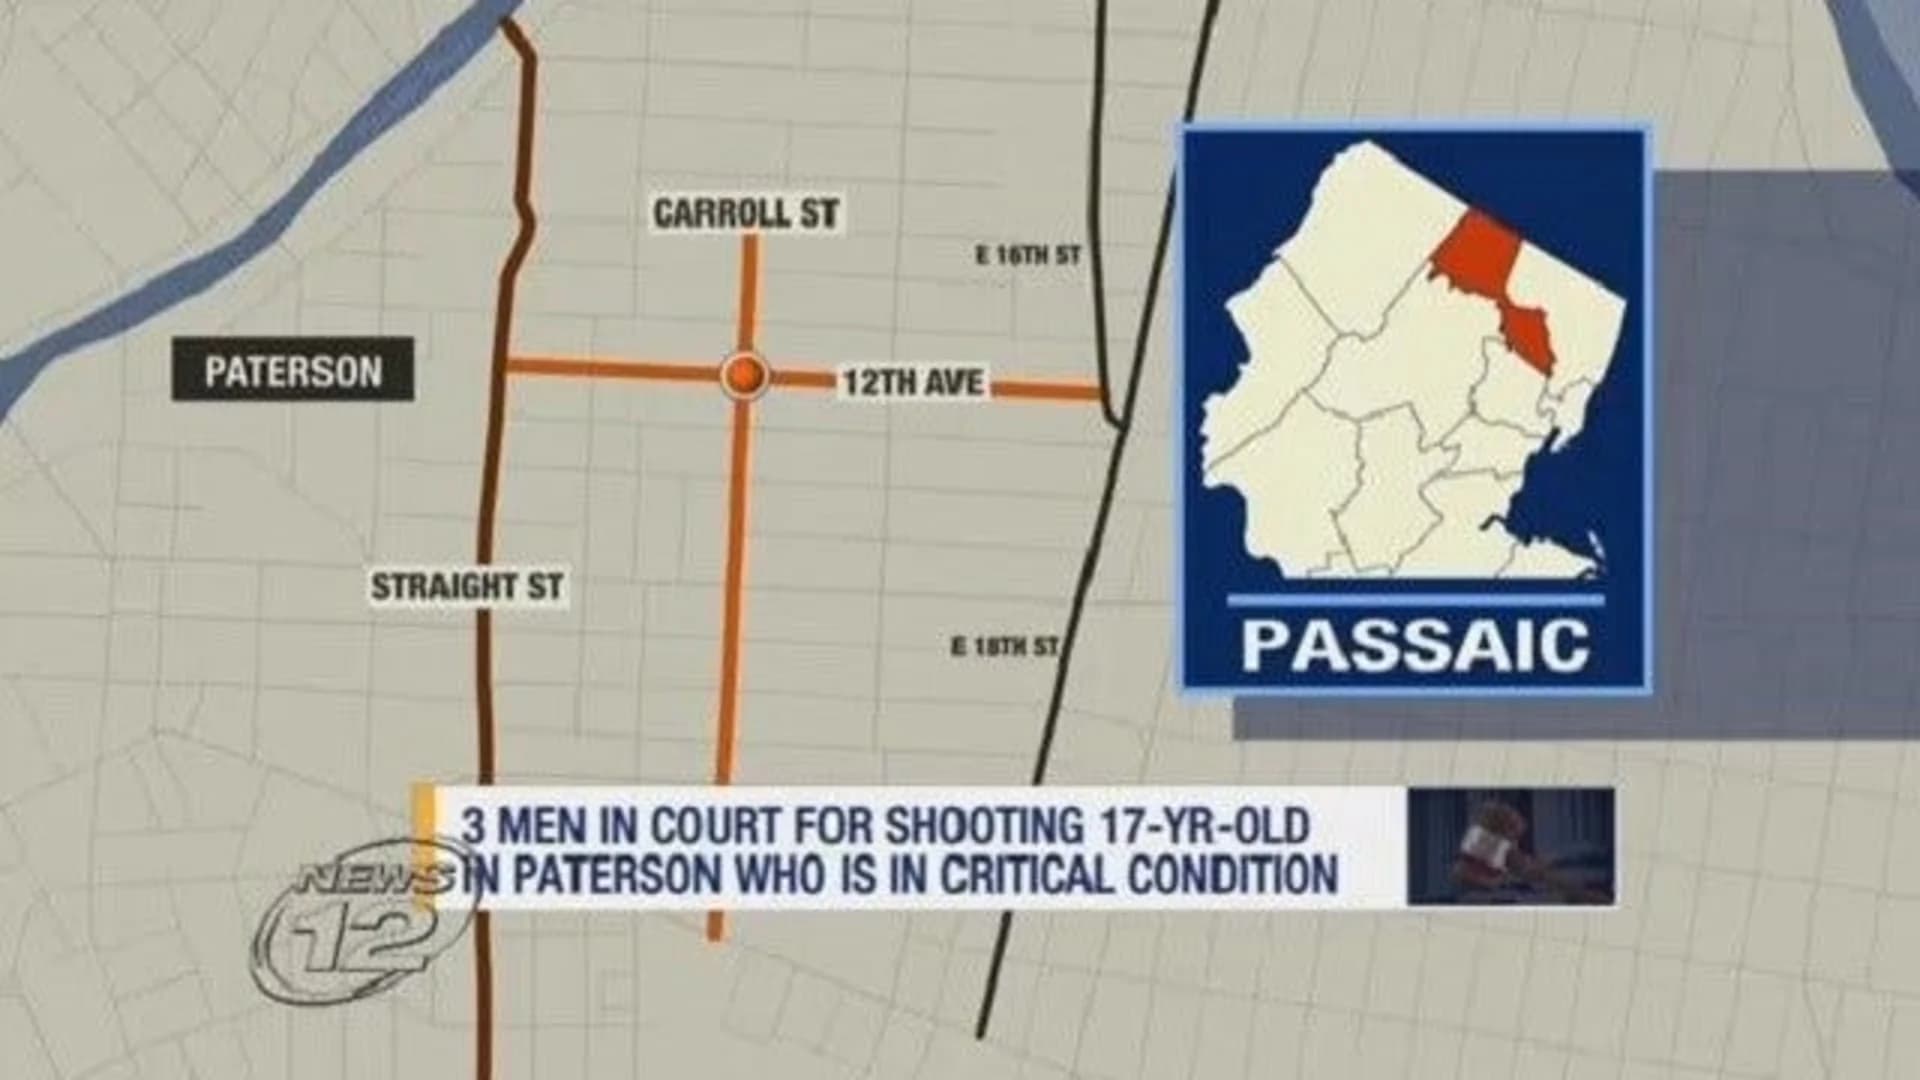 Girl, 17, in critical condition after shooting; 3 Paterson men charged